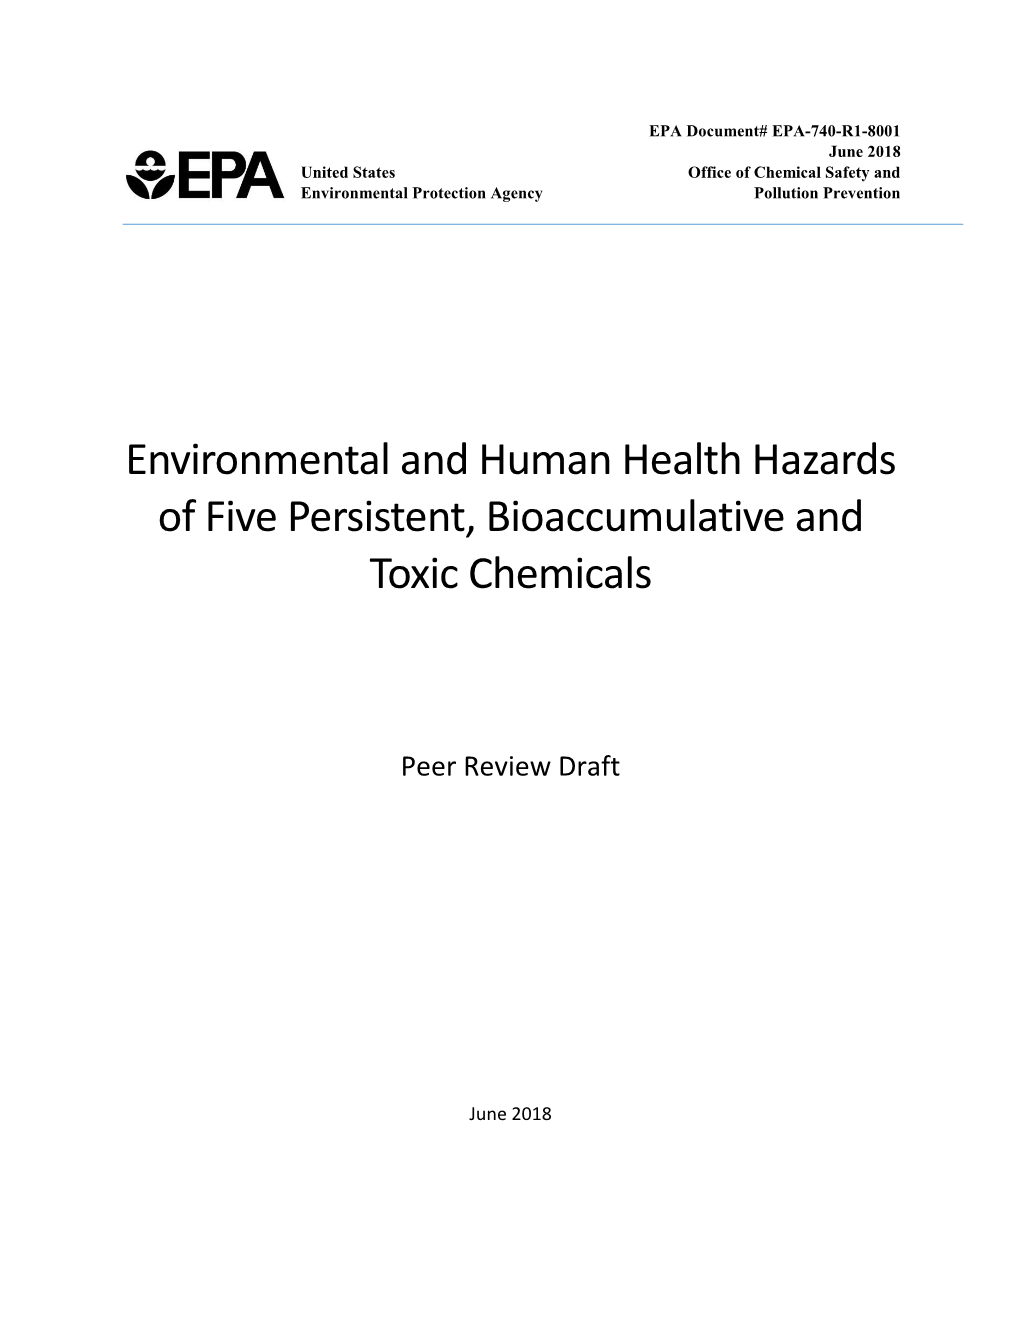 Environmental and Human Health Hazards of Five Persistent, Bioaccumulative and Toxic Chemicals